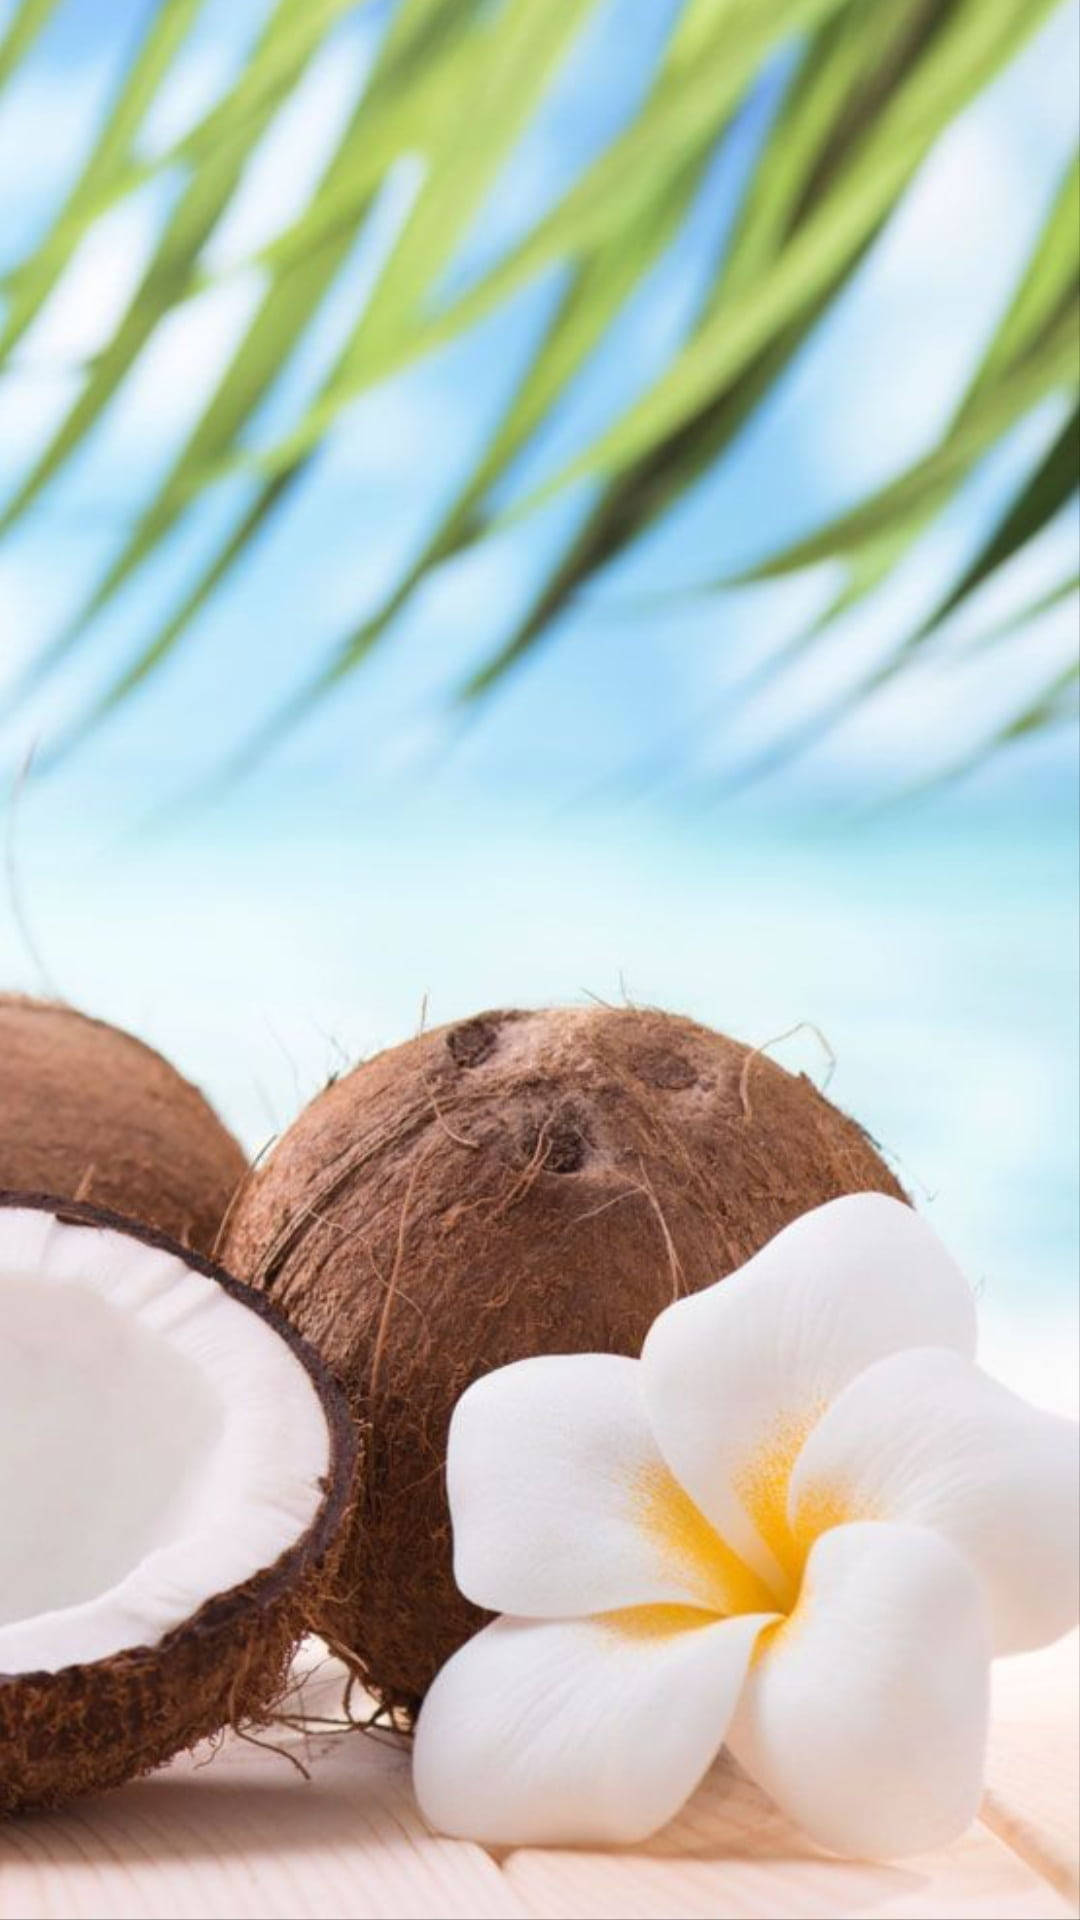 Coconut Fruits With White Plumeria Flower Wallpaper